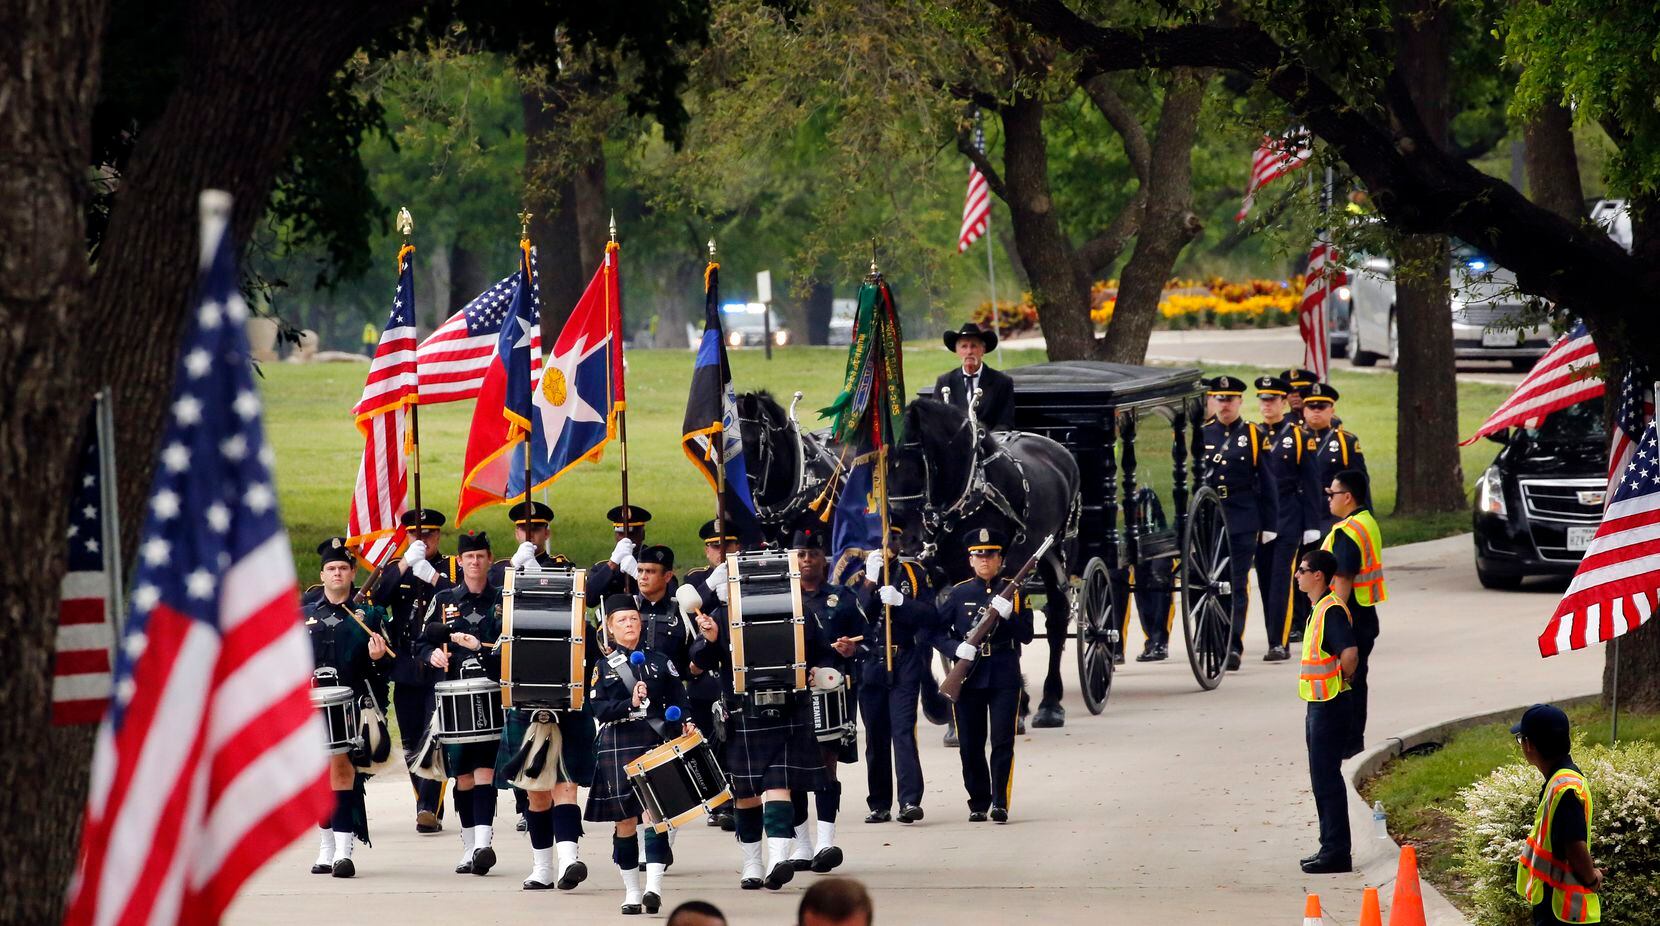 The Dallas Police Color Guard and Honor Guard escort the horse-drawn carriage carrying slain...